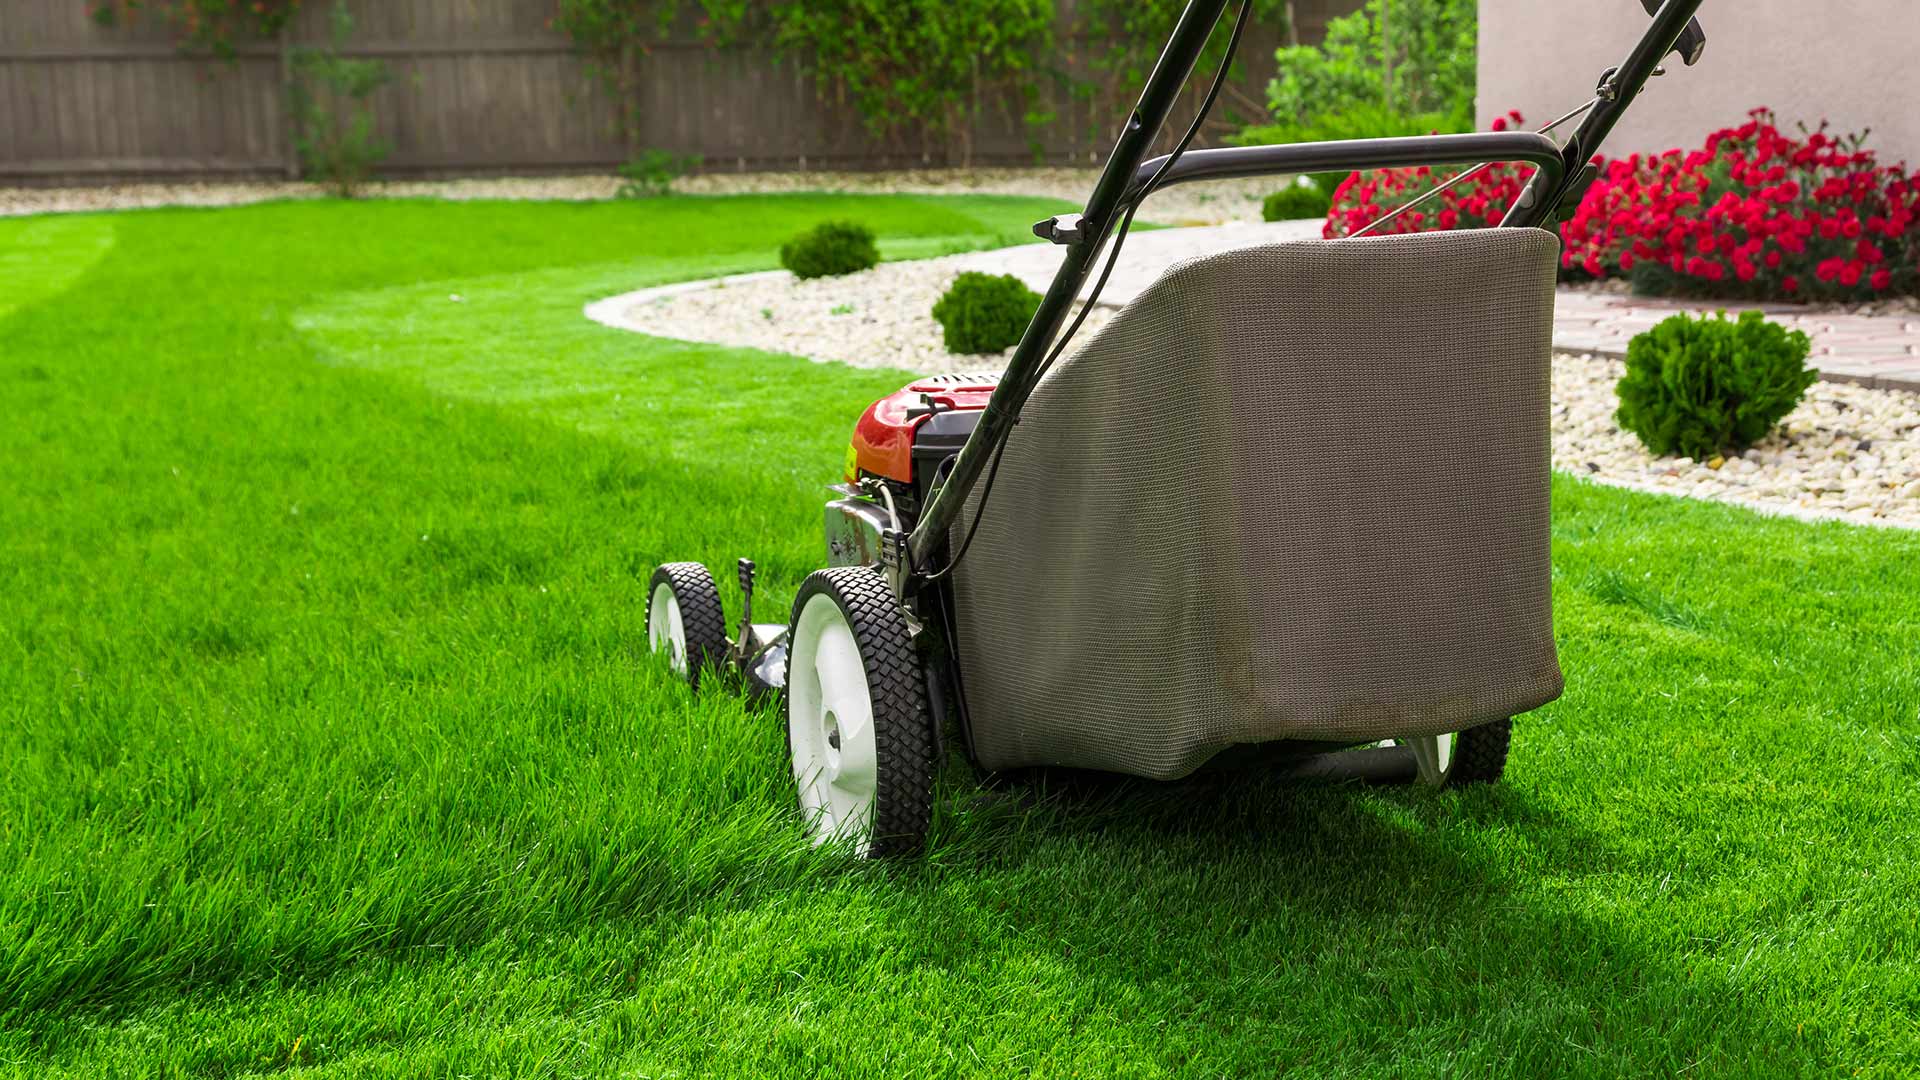 Sign Up for a Lawn Mowing Service to Make Your Life Easier